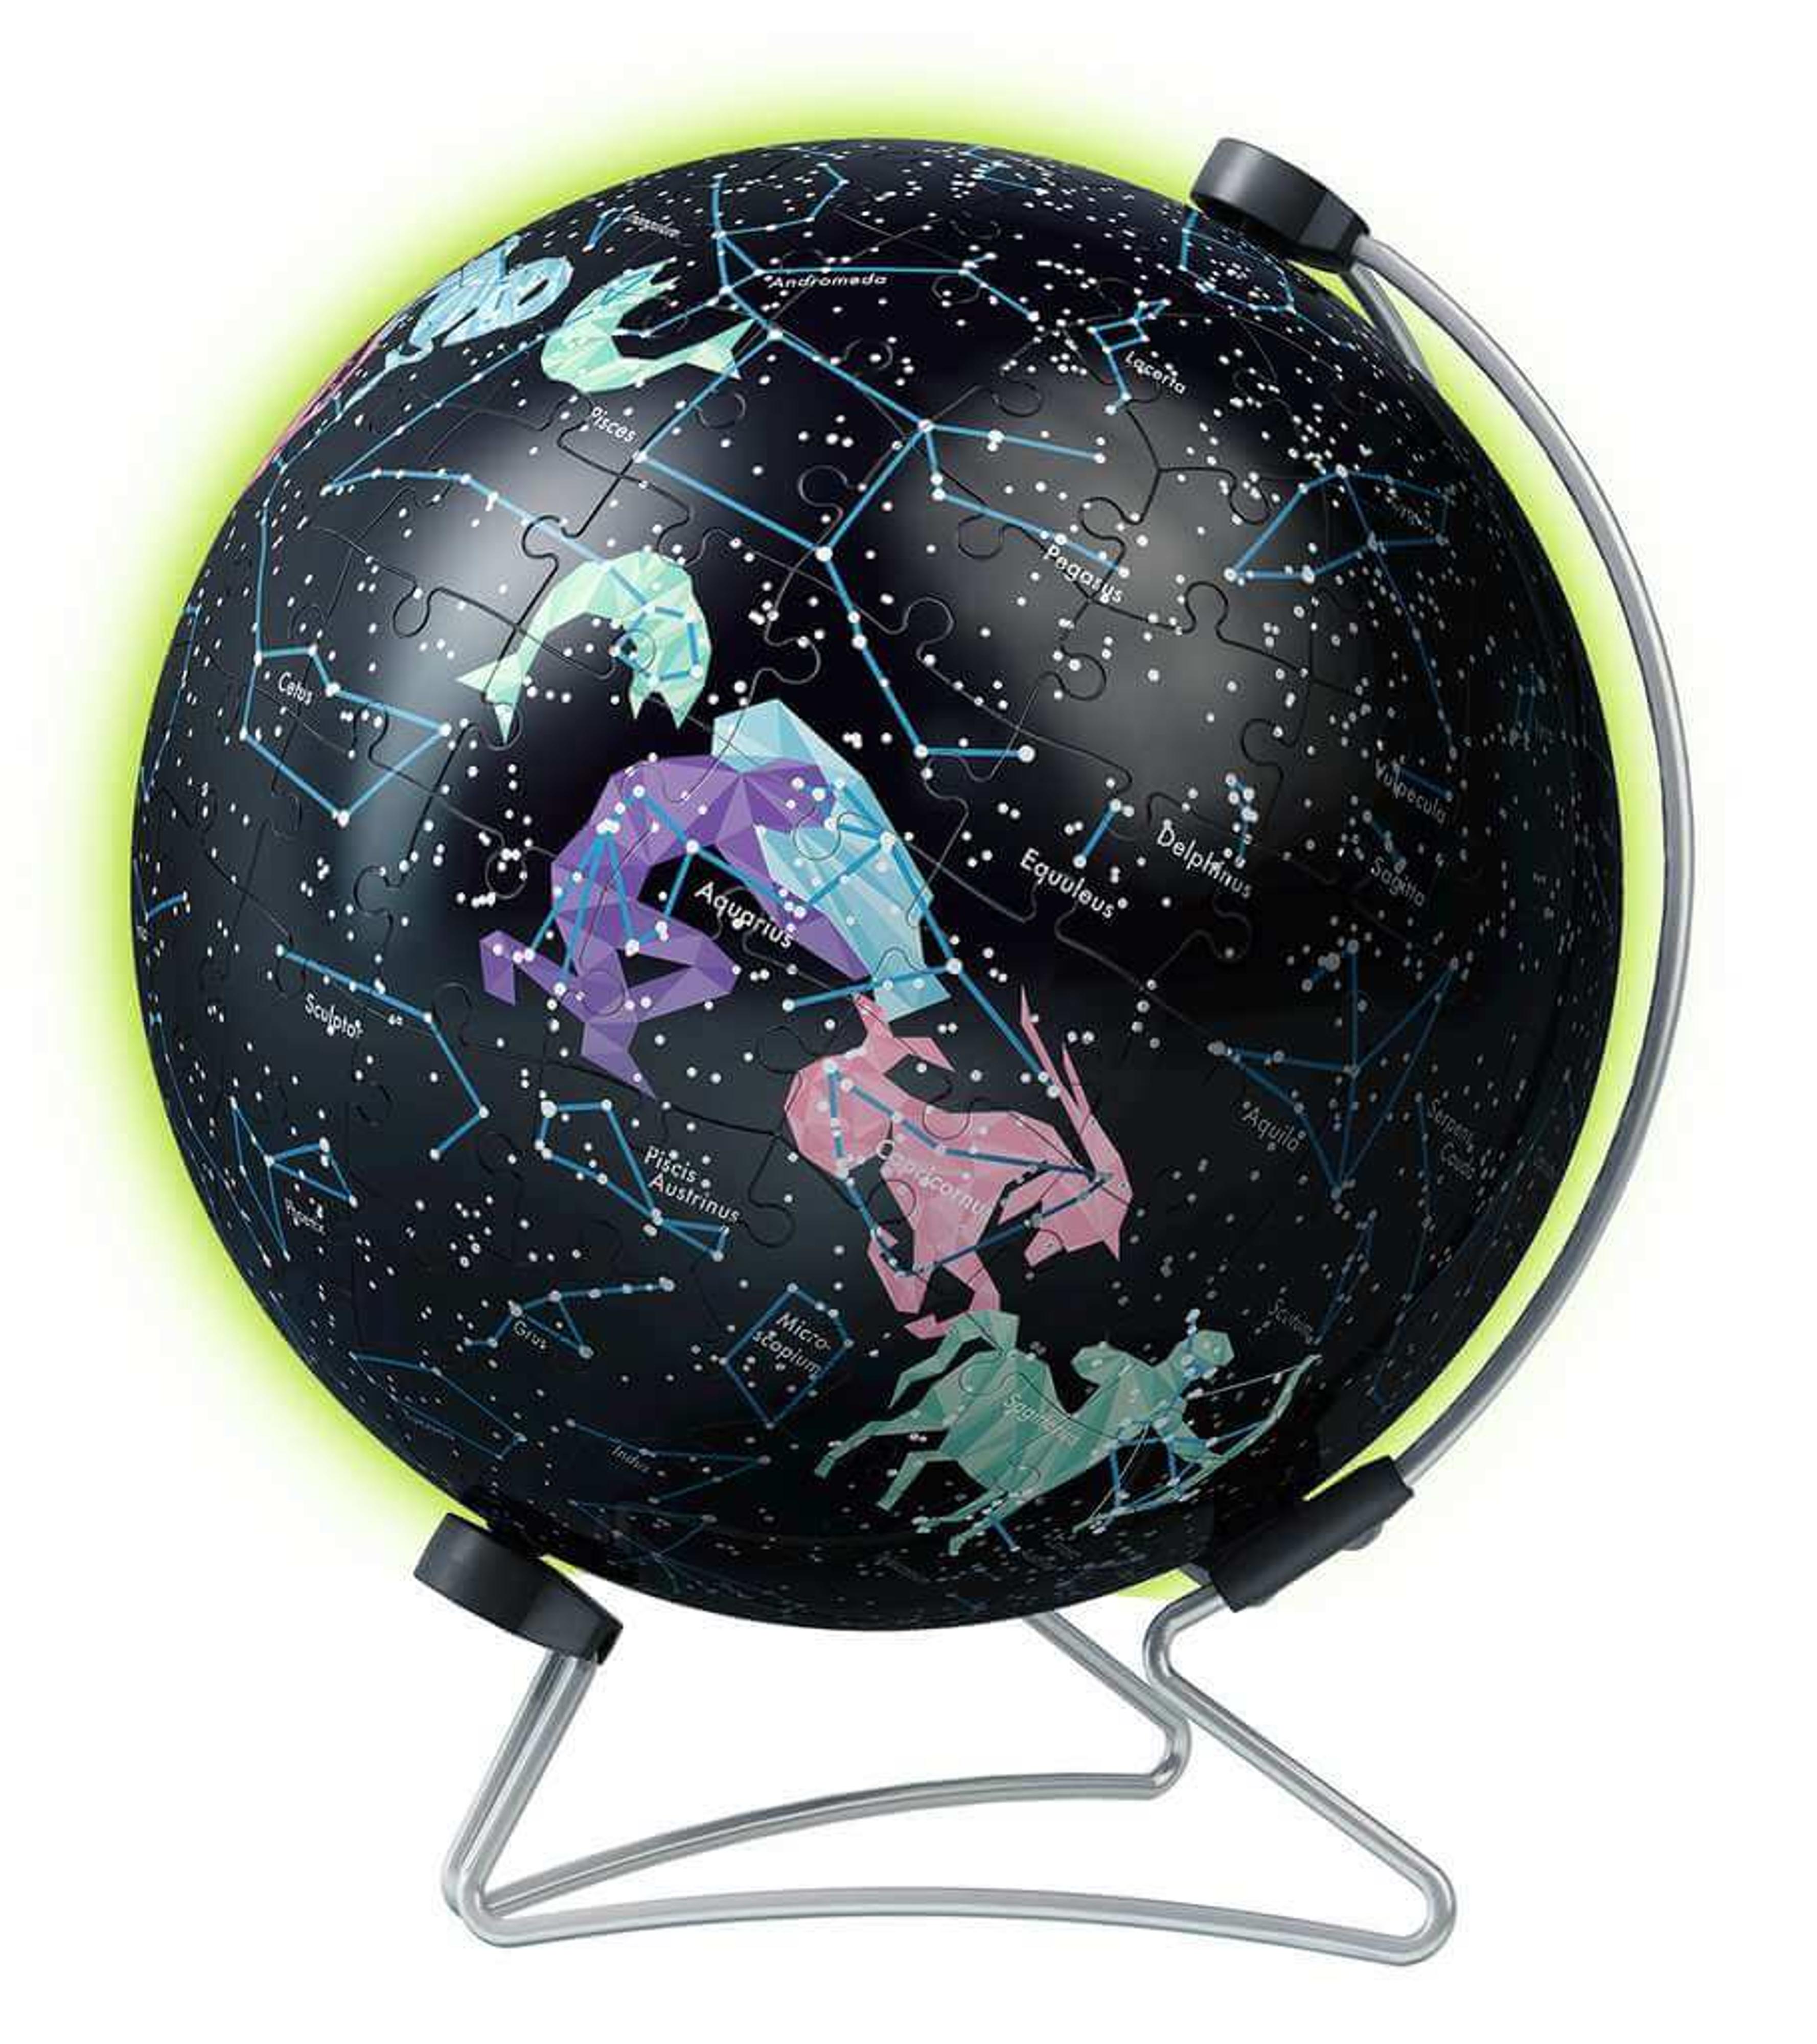 Puzzle-Ball Starglobe w/ Glow-in-the-Dark 3D Puzzle (180 pcs)